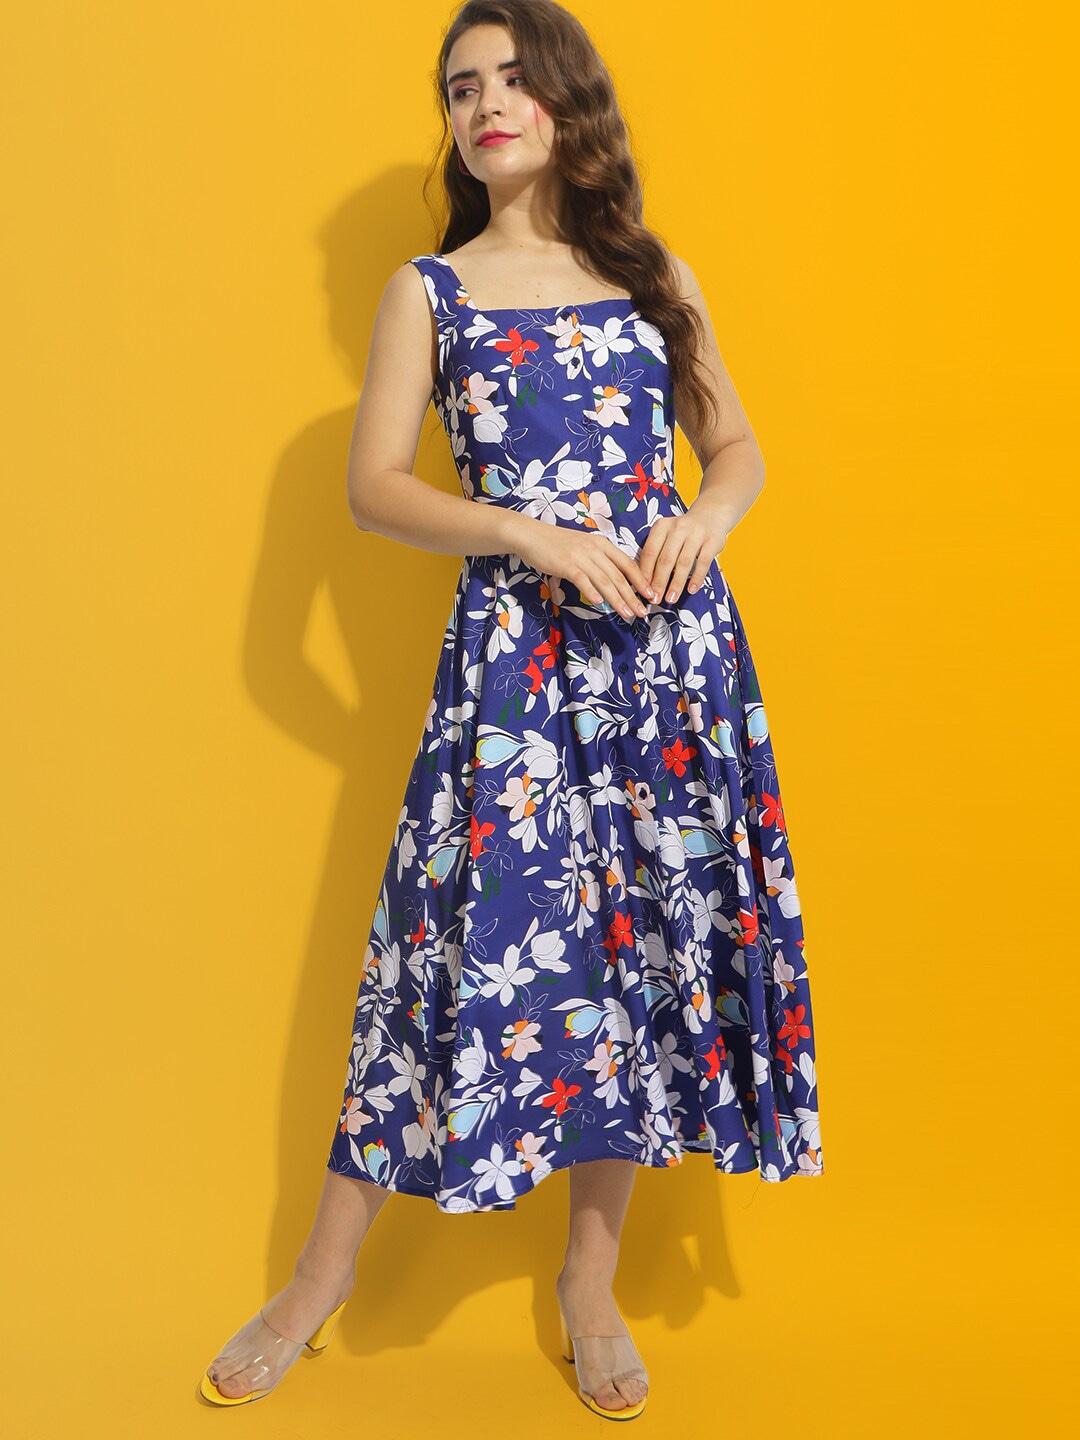 mast & harbour navy blue & white floral printed a line midi dress